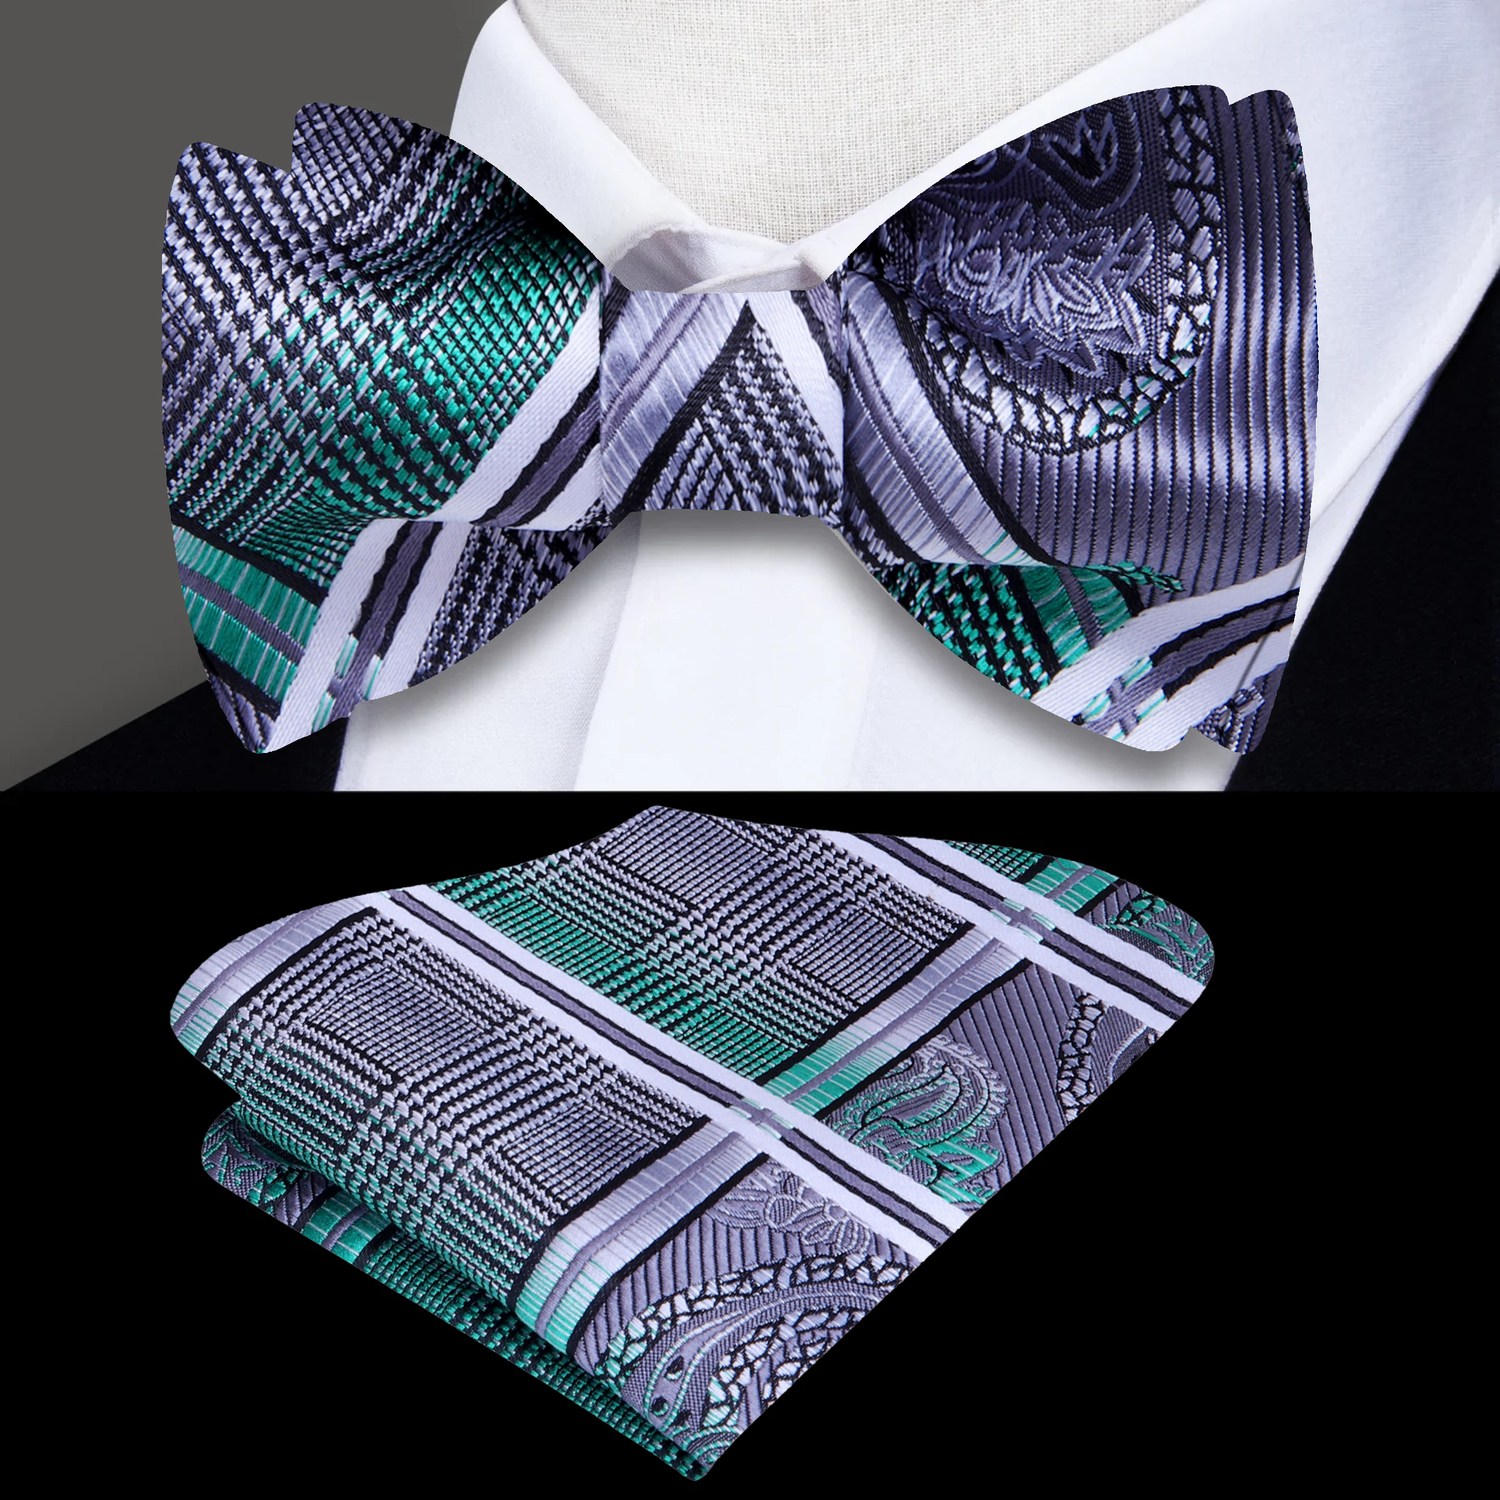 Main: A Silver, Black, Green Geometric and Paisley Pattern Silk Self Tie Bow Tie, Matching Pocket Square